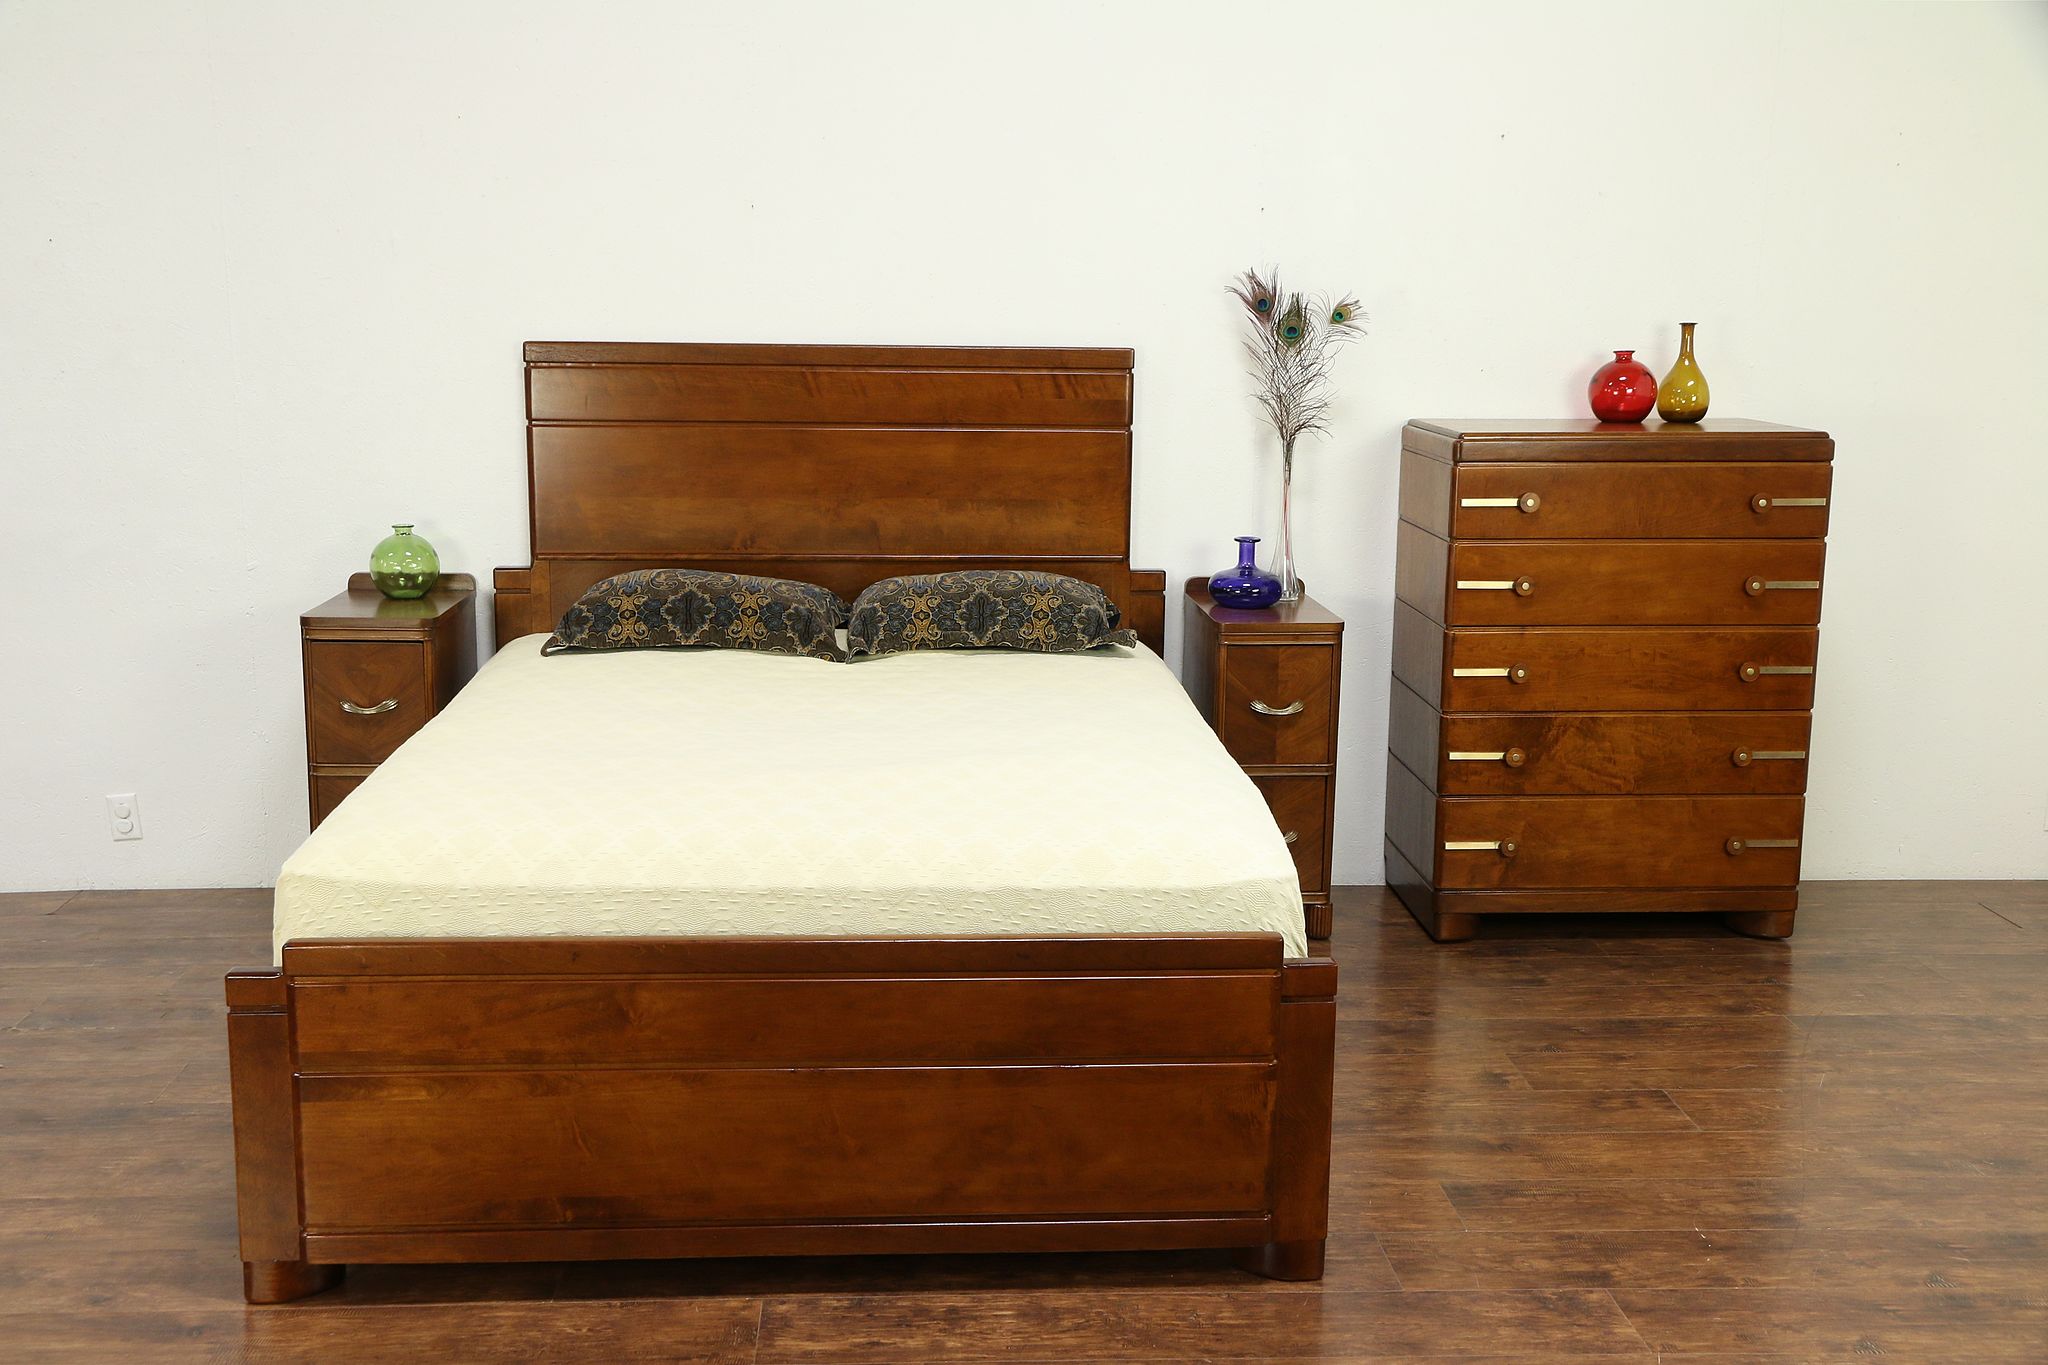 Sold Midcentury Modern Streamline Vintage Queen Size Bed Deskey 30499 Harp Gallery Antiques Furniture,Daily Bedroom Cleaning Checklist